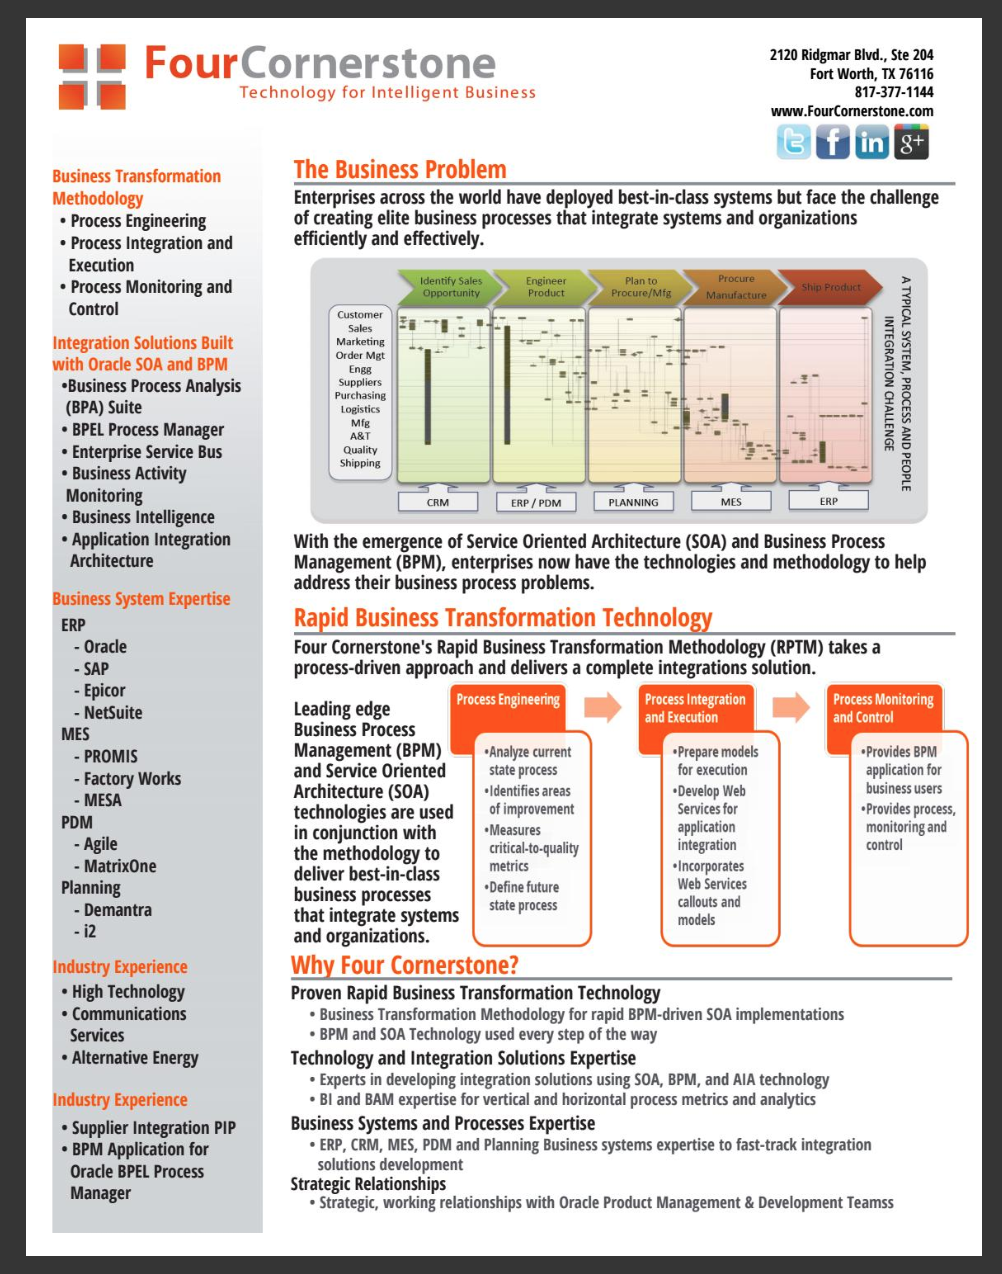 This brochure outlines SOA-BPM services that Four Cornerstone provides.